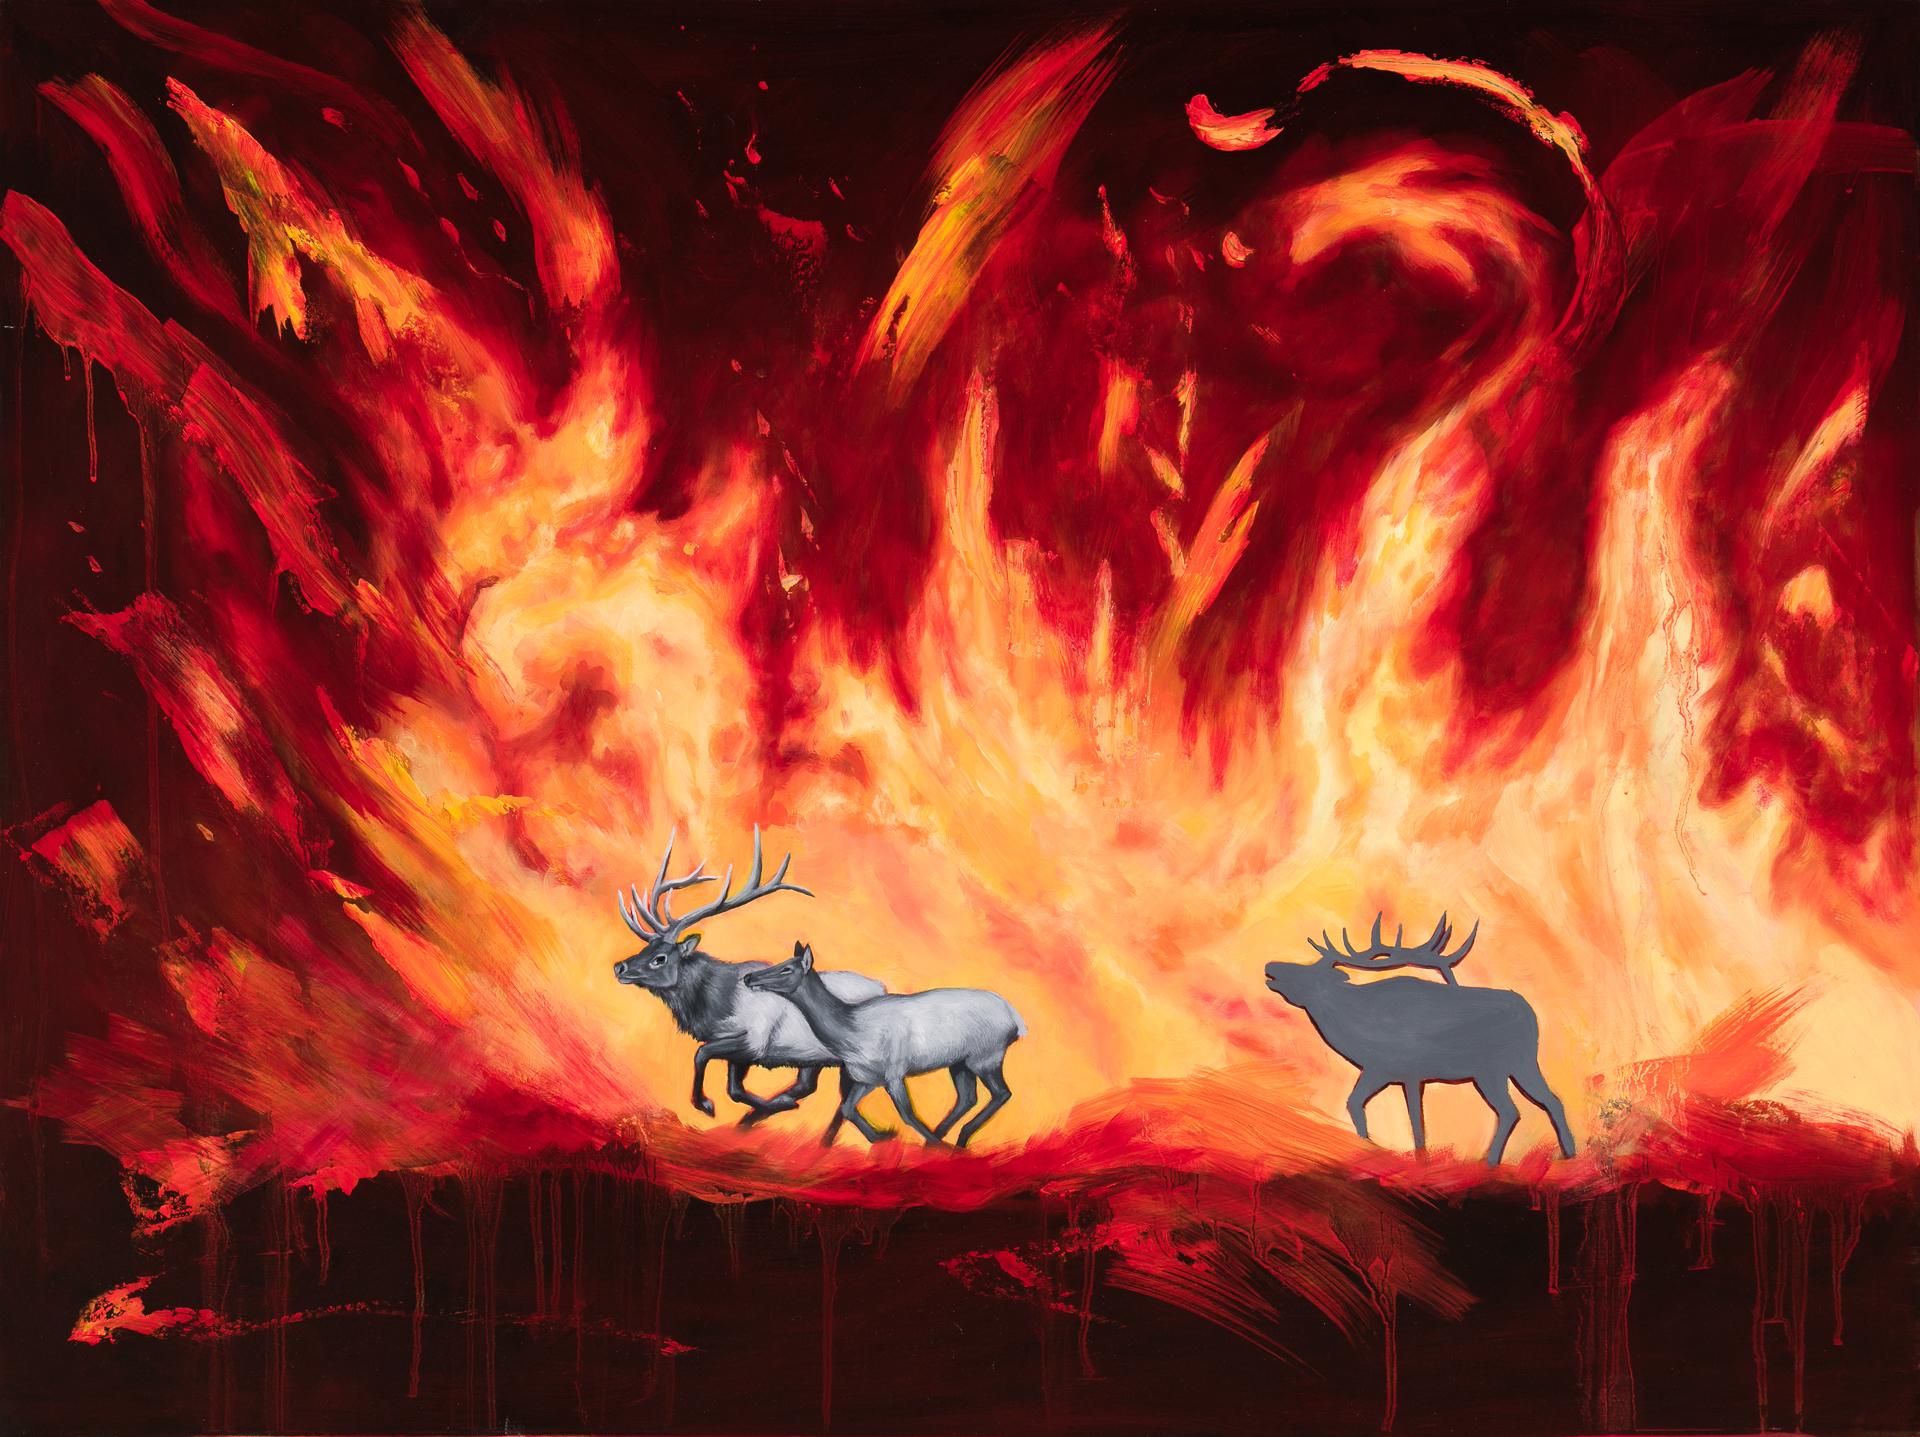 "Out of the Flames" Oil Painting